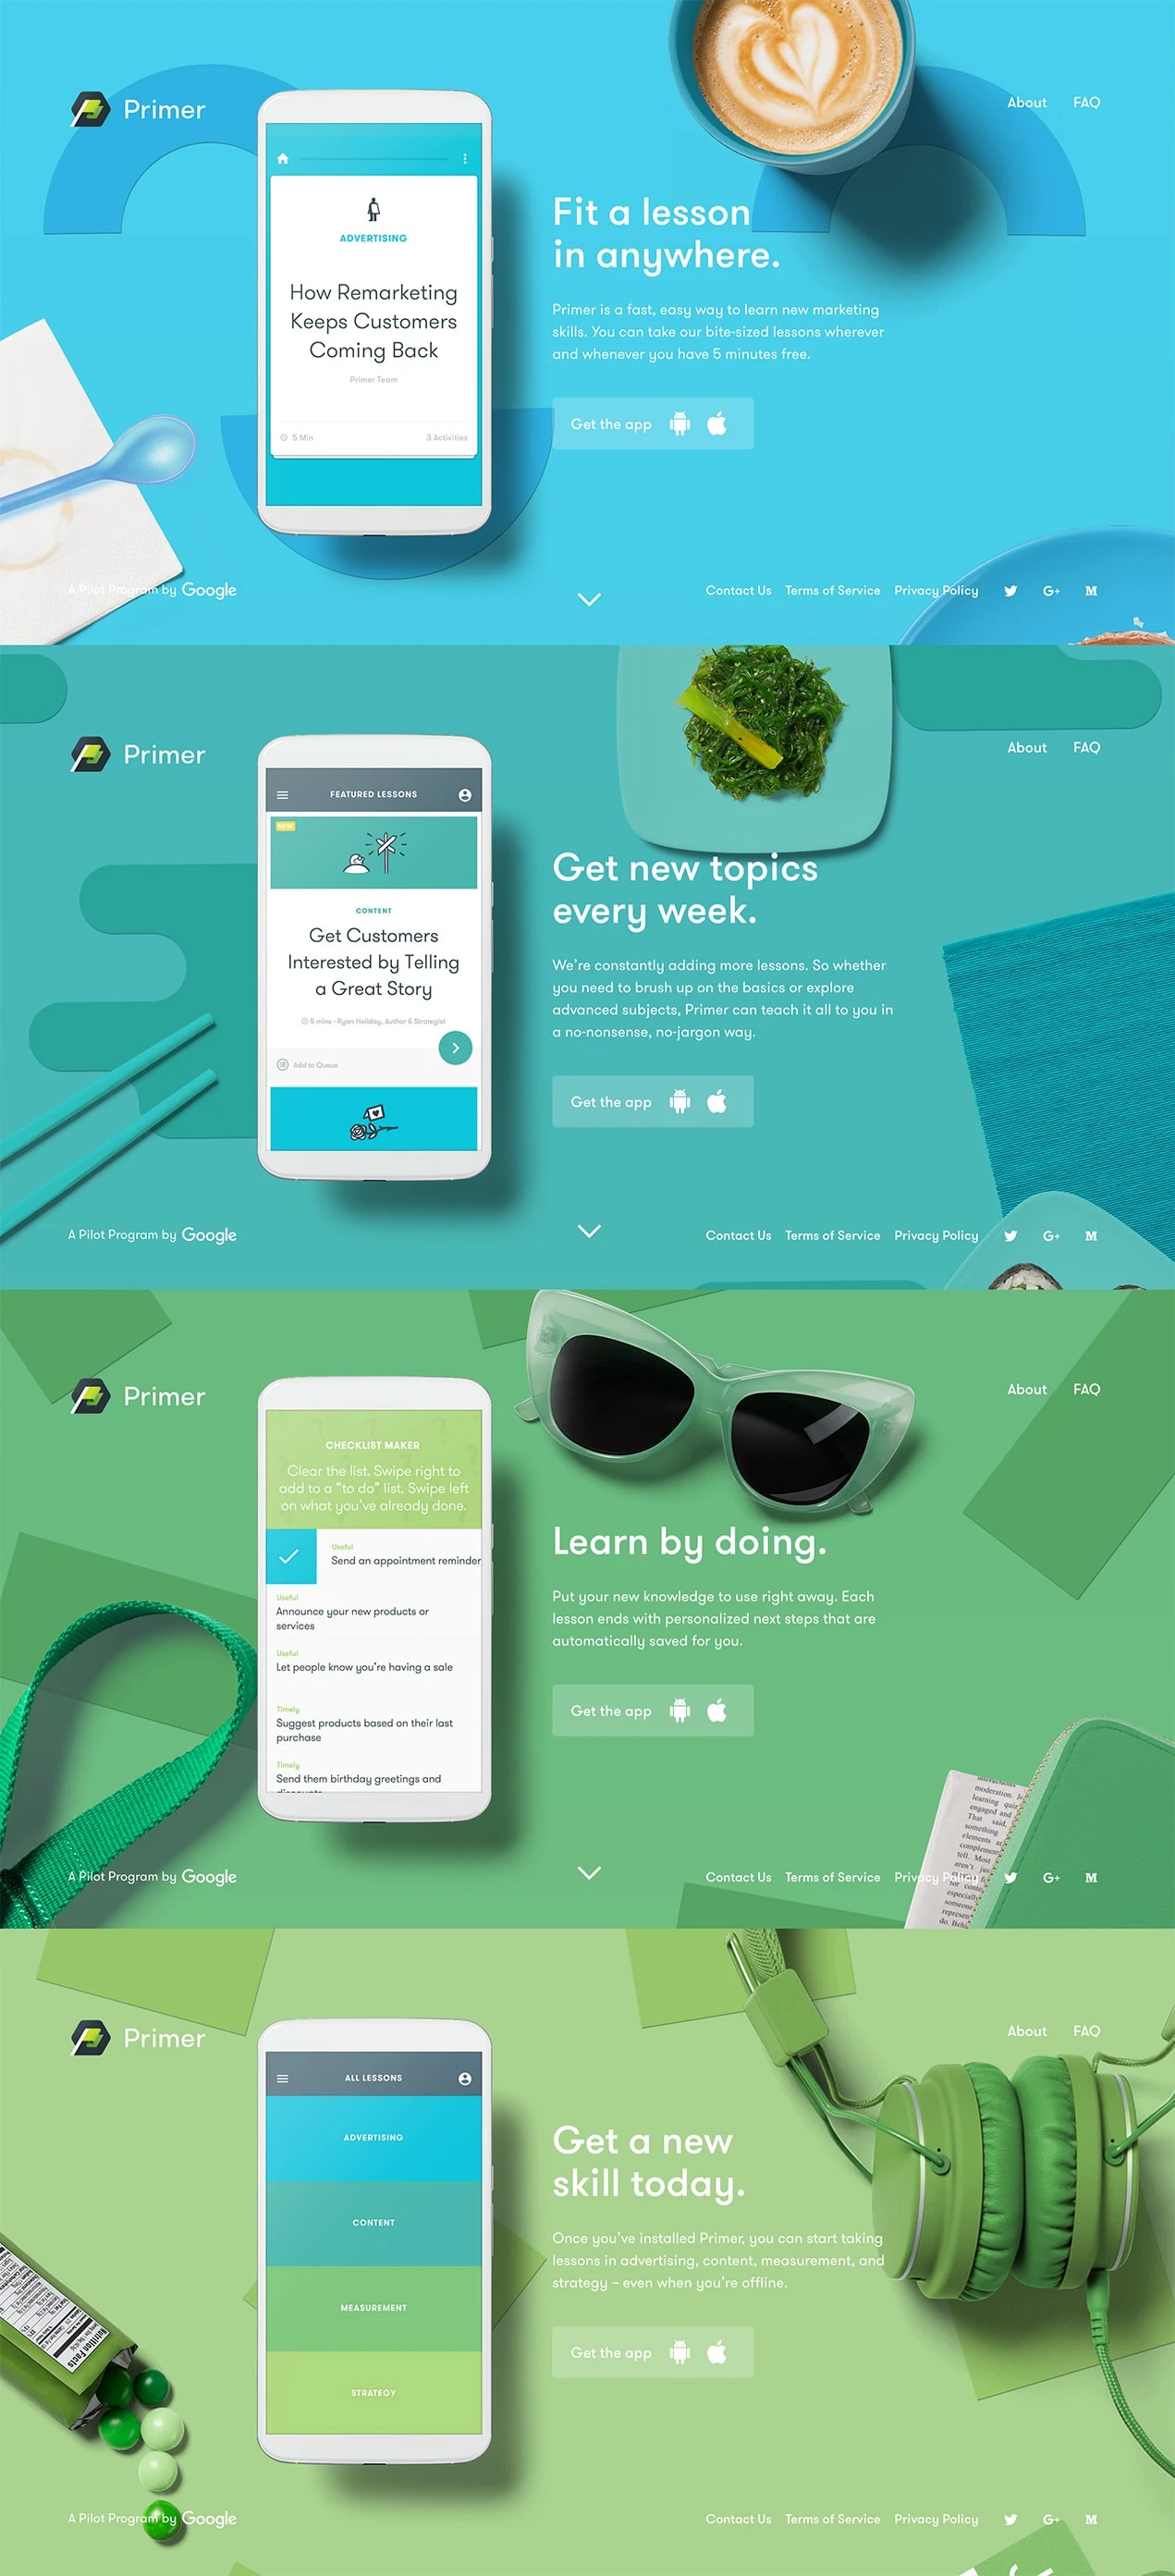 Primer Landing Page Example: Primer is the fast, easy way to learn new marketing skills. Download our free mobile app for 5-minute lessons you can do anywhere.